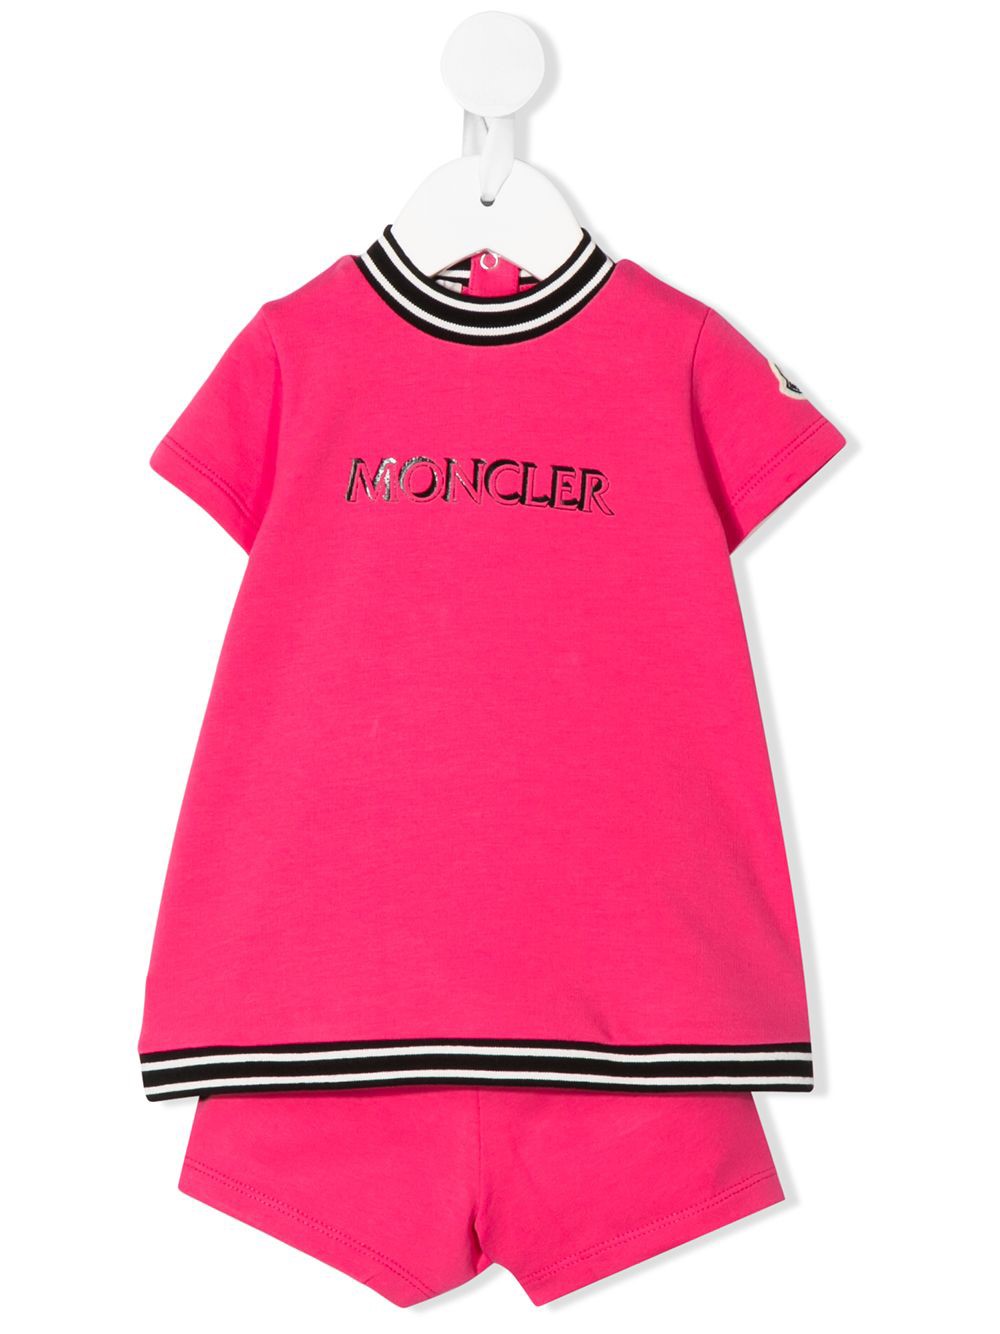 moncler shirts for toddlers